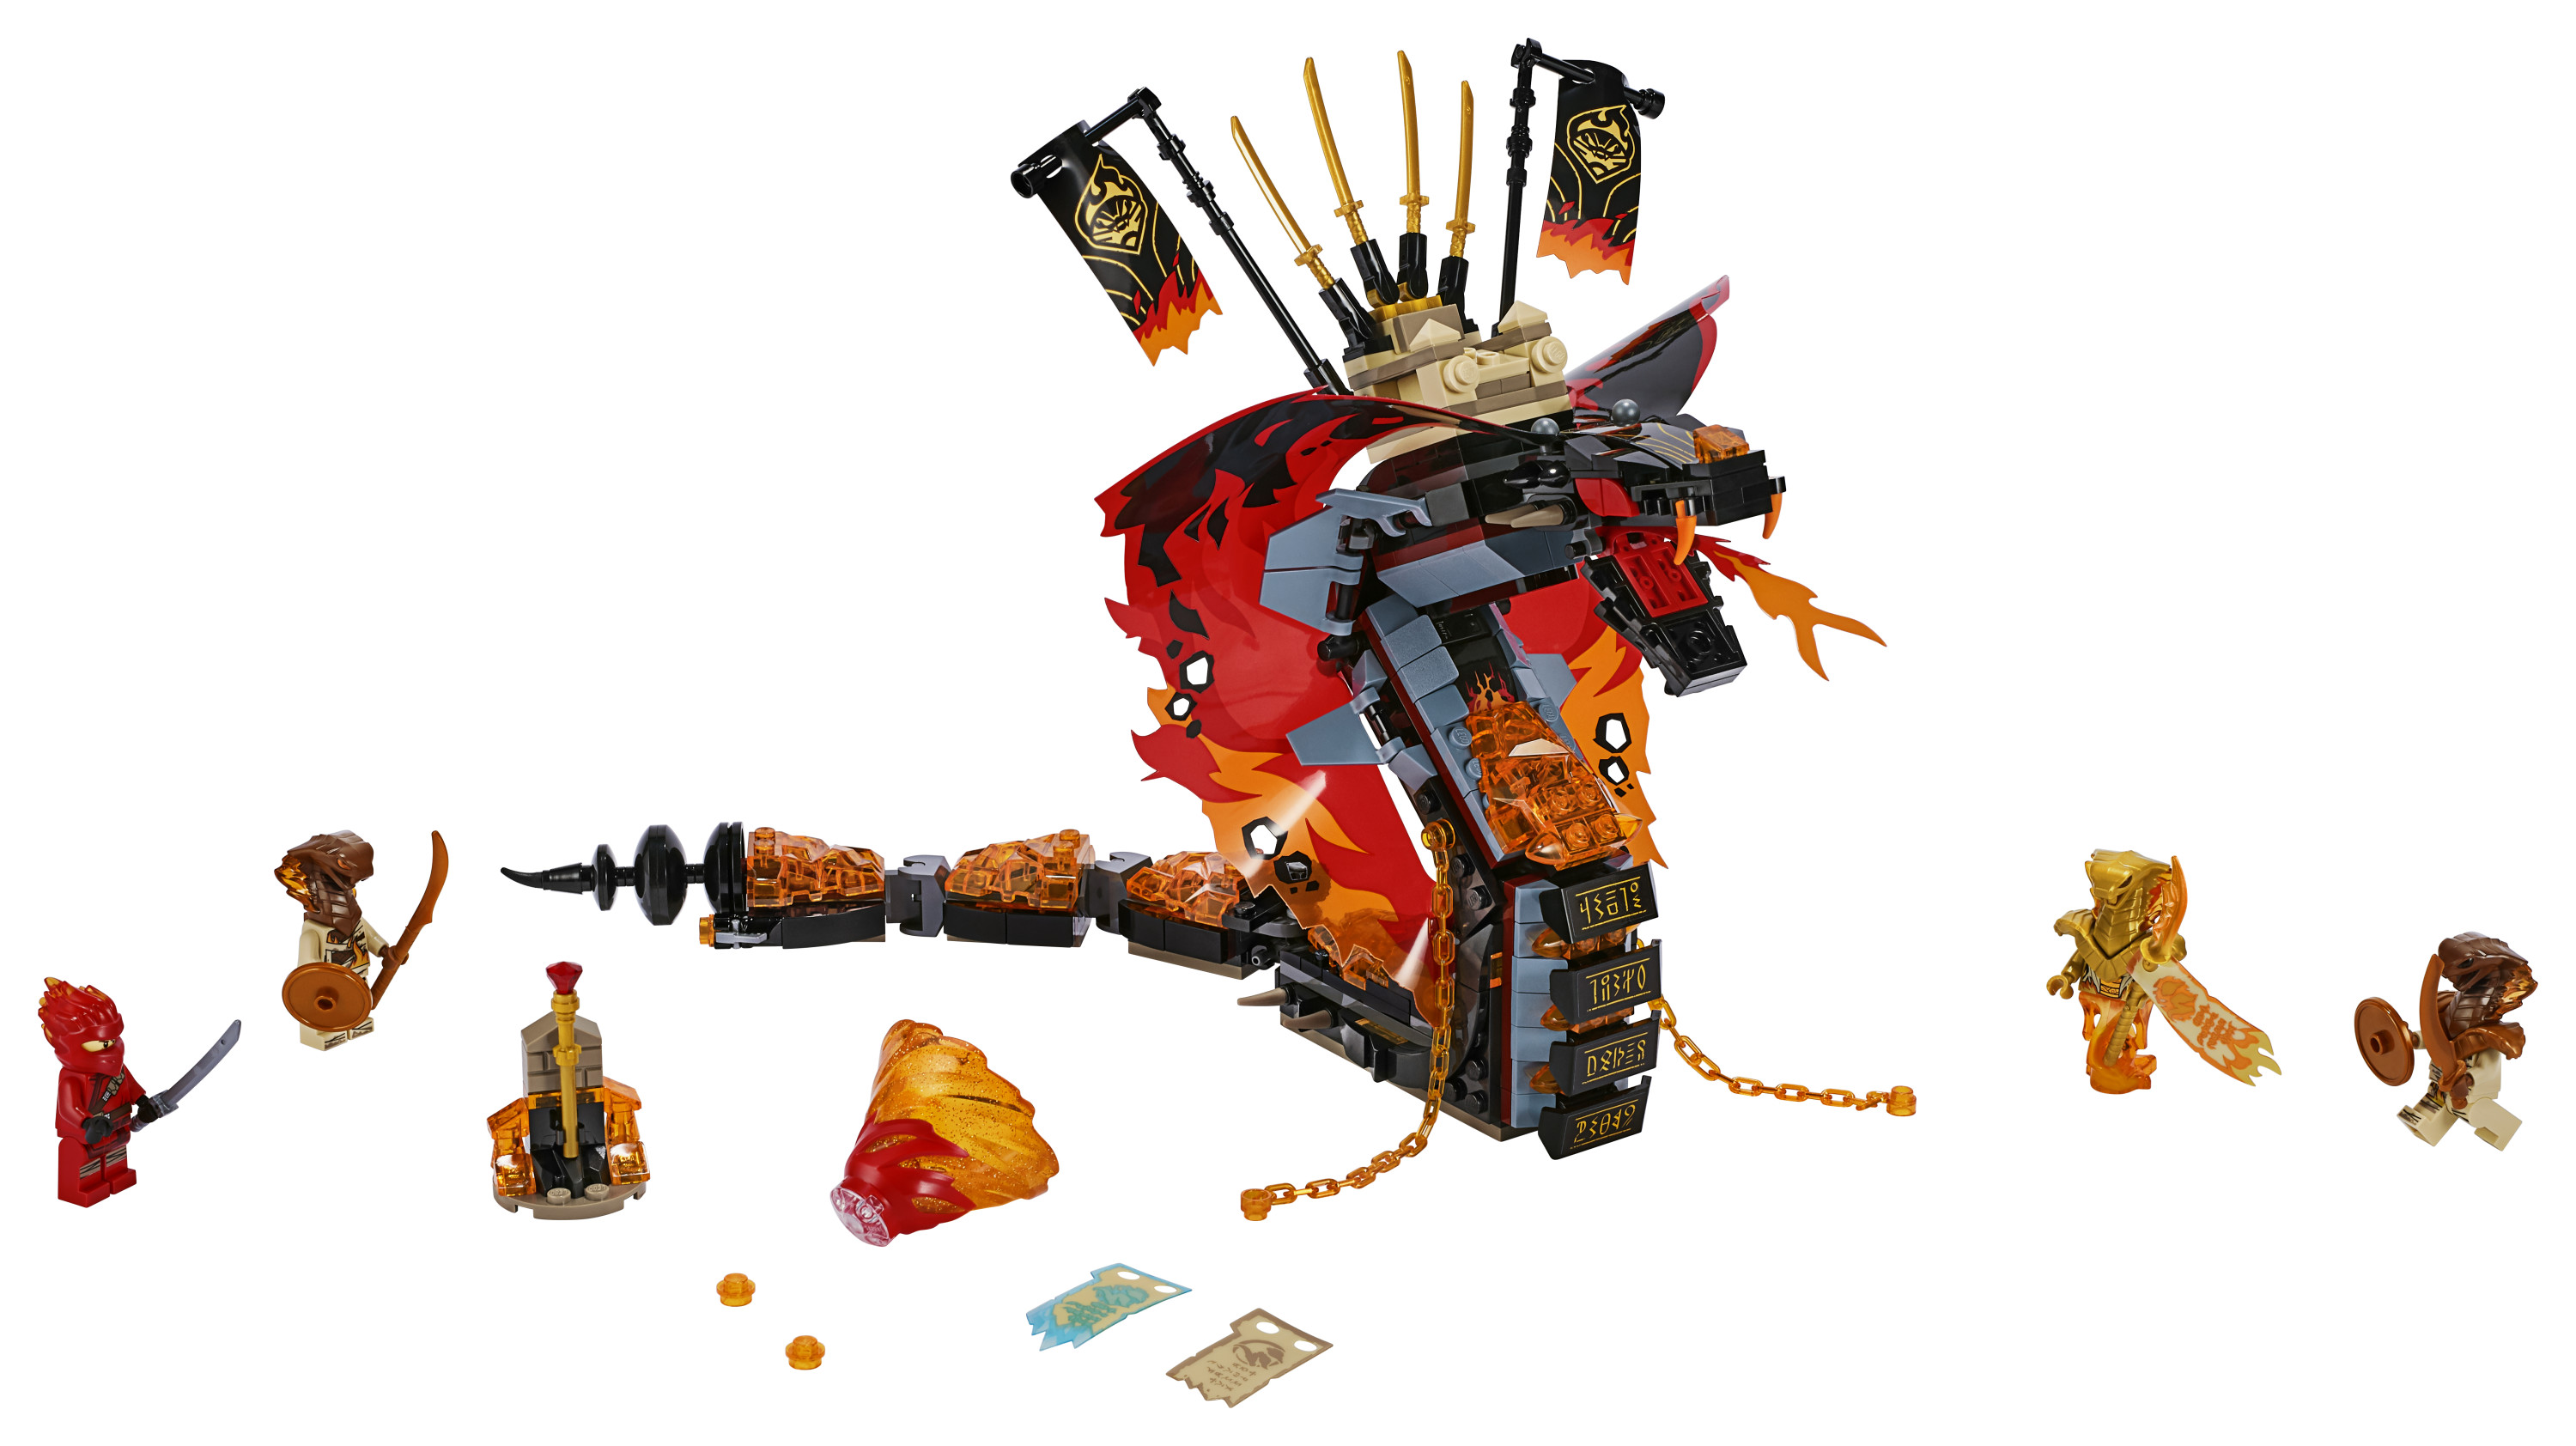 LEGO NINJAGO Fire Fang 70674 Snake Action Building Toy for Kids with Ninja Minifigures (463 pieces) - image 3 of 6